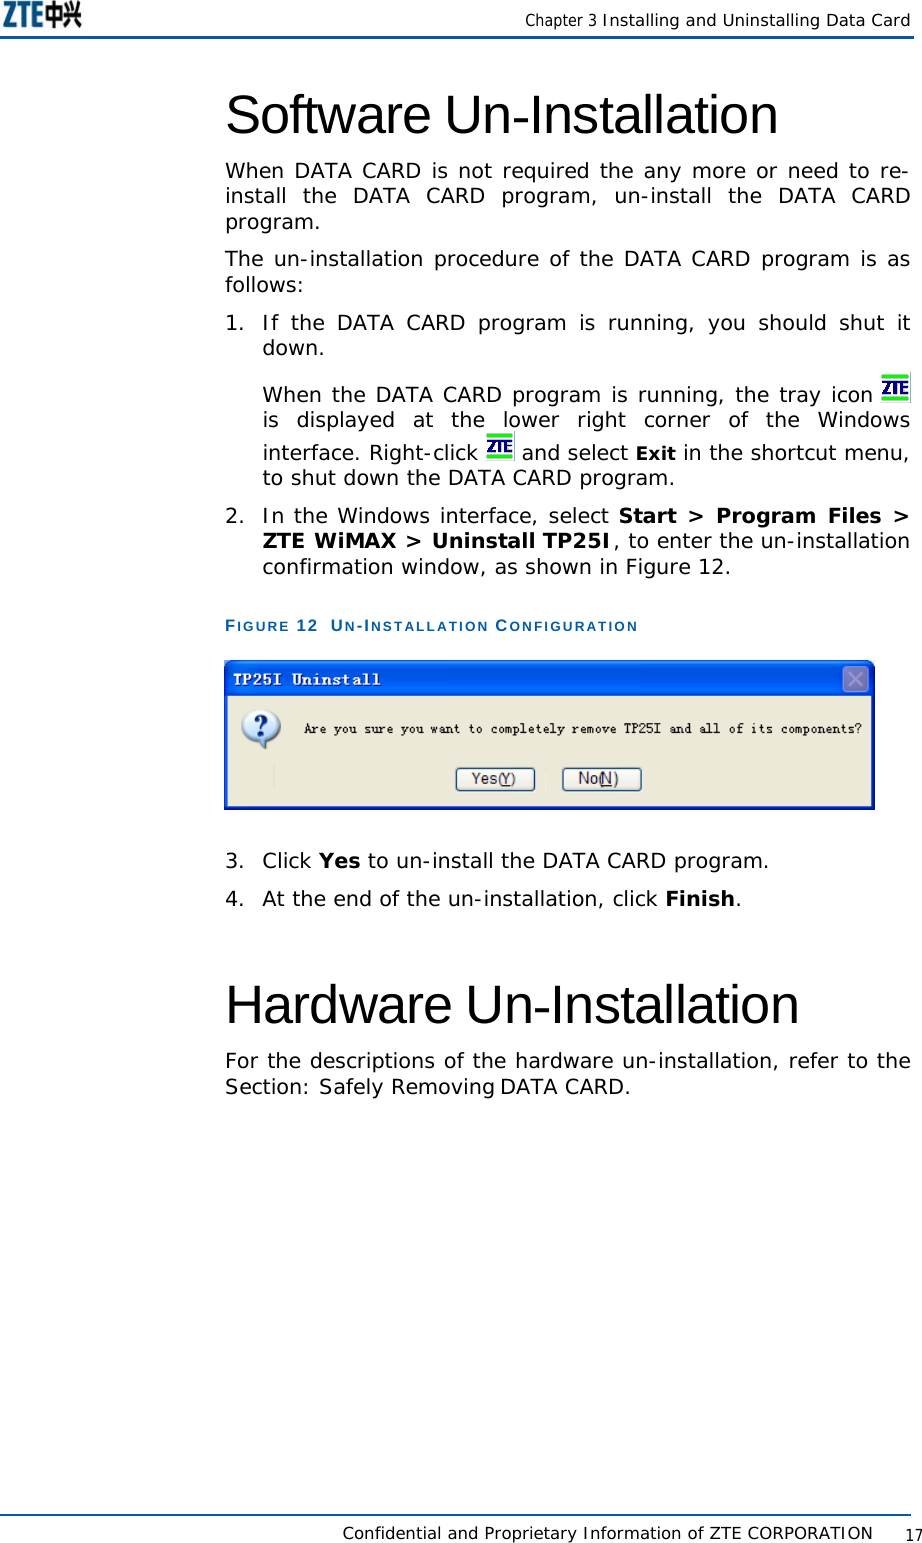    Chapter 3 Installing and Uninstalling Data Card   Confidential and Proprietary Information of ZTE CORPORATION           17Software Un-Installation  When DATA CARD is not required the any more or need to re-install the DATA CARD program, un-install the DATA CARD program.  The un-installation procedure of the DATA CARD program is as follows:  1.  If the DATA CARD program is running, you should shut it down.  When the DATA CARD program is running, the tray icon   is displayed at the lower right corner of the Windows interface. Right-click   and select Exit in the shortcut menu, to shut down the DATA CARD program.  2.  In the Windows interface, select Start &gt; Program Files &gt; ZTE WiMAX &gt; Uninstall TP25I, to enter the un-installation confirmation window, as shown in Figure 12.  FIGURE 12  UN-INSTALLATION CONFIGURATION   3. Click Yes to un-install the DATA CARD program.  4.  At the end of the un-installation, click Finish.  Hardware Un-Installation  For the descriptions of the hardware un-installation, refer to the Section: Safely Removing DATA CARD. 